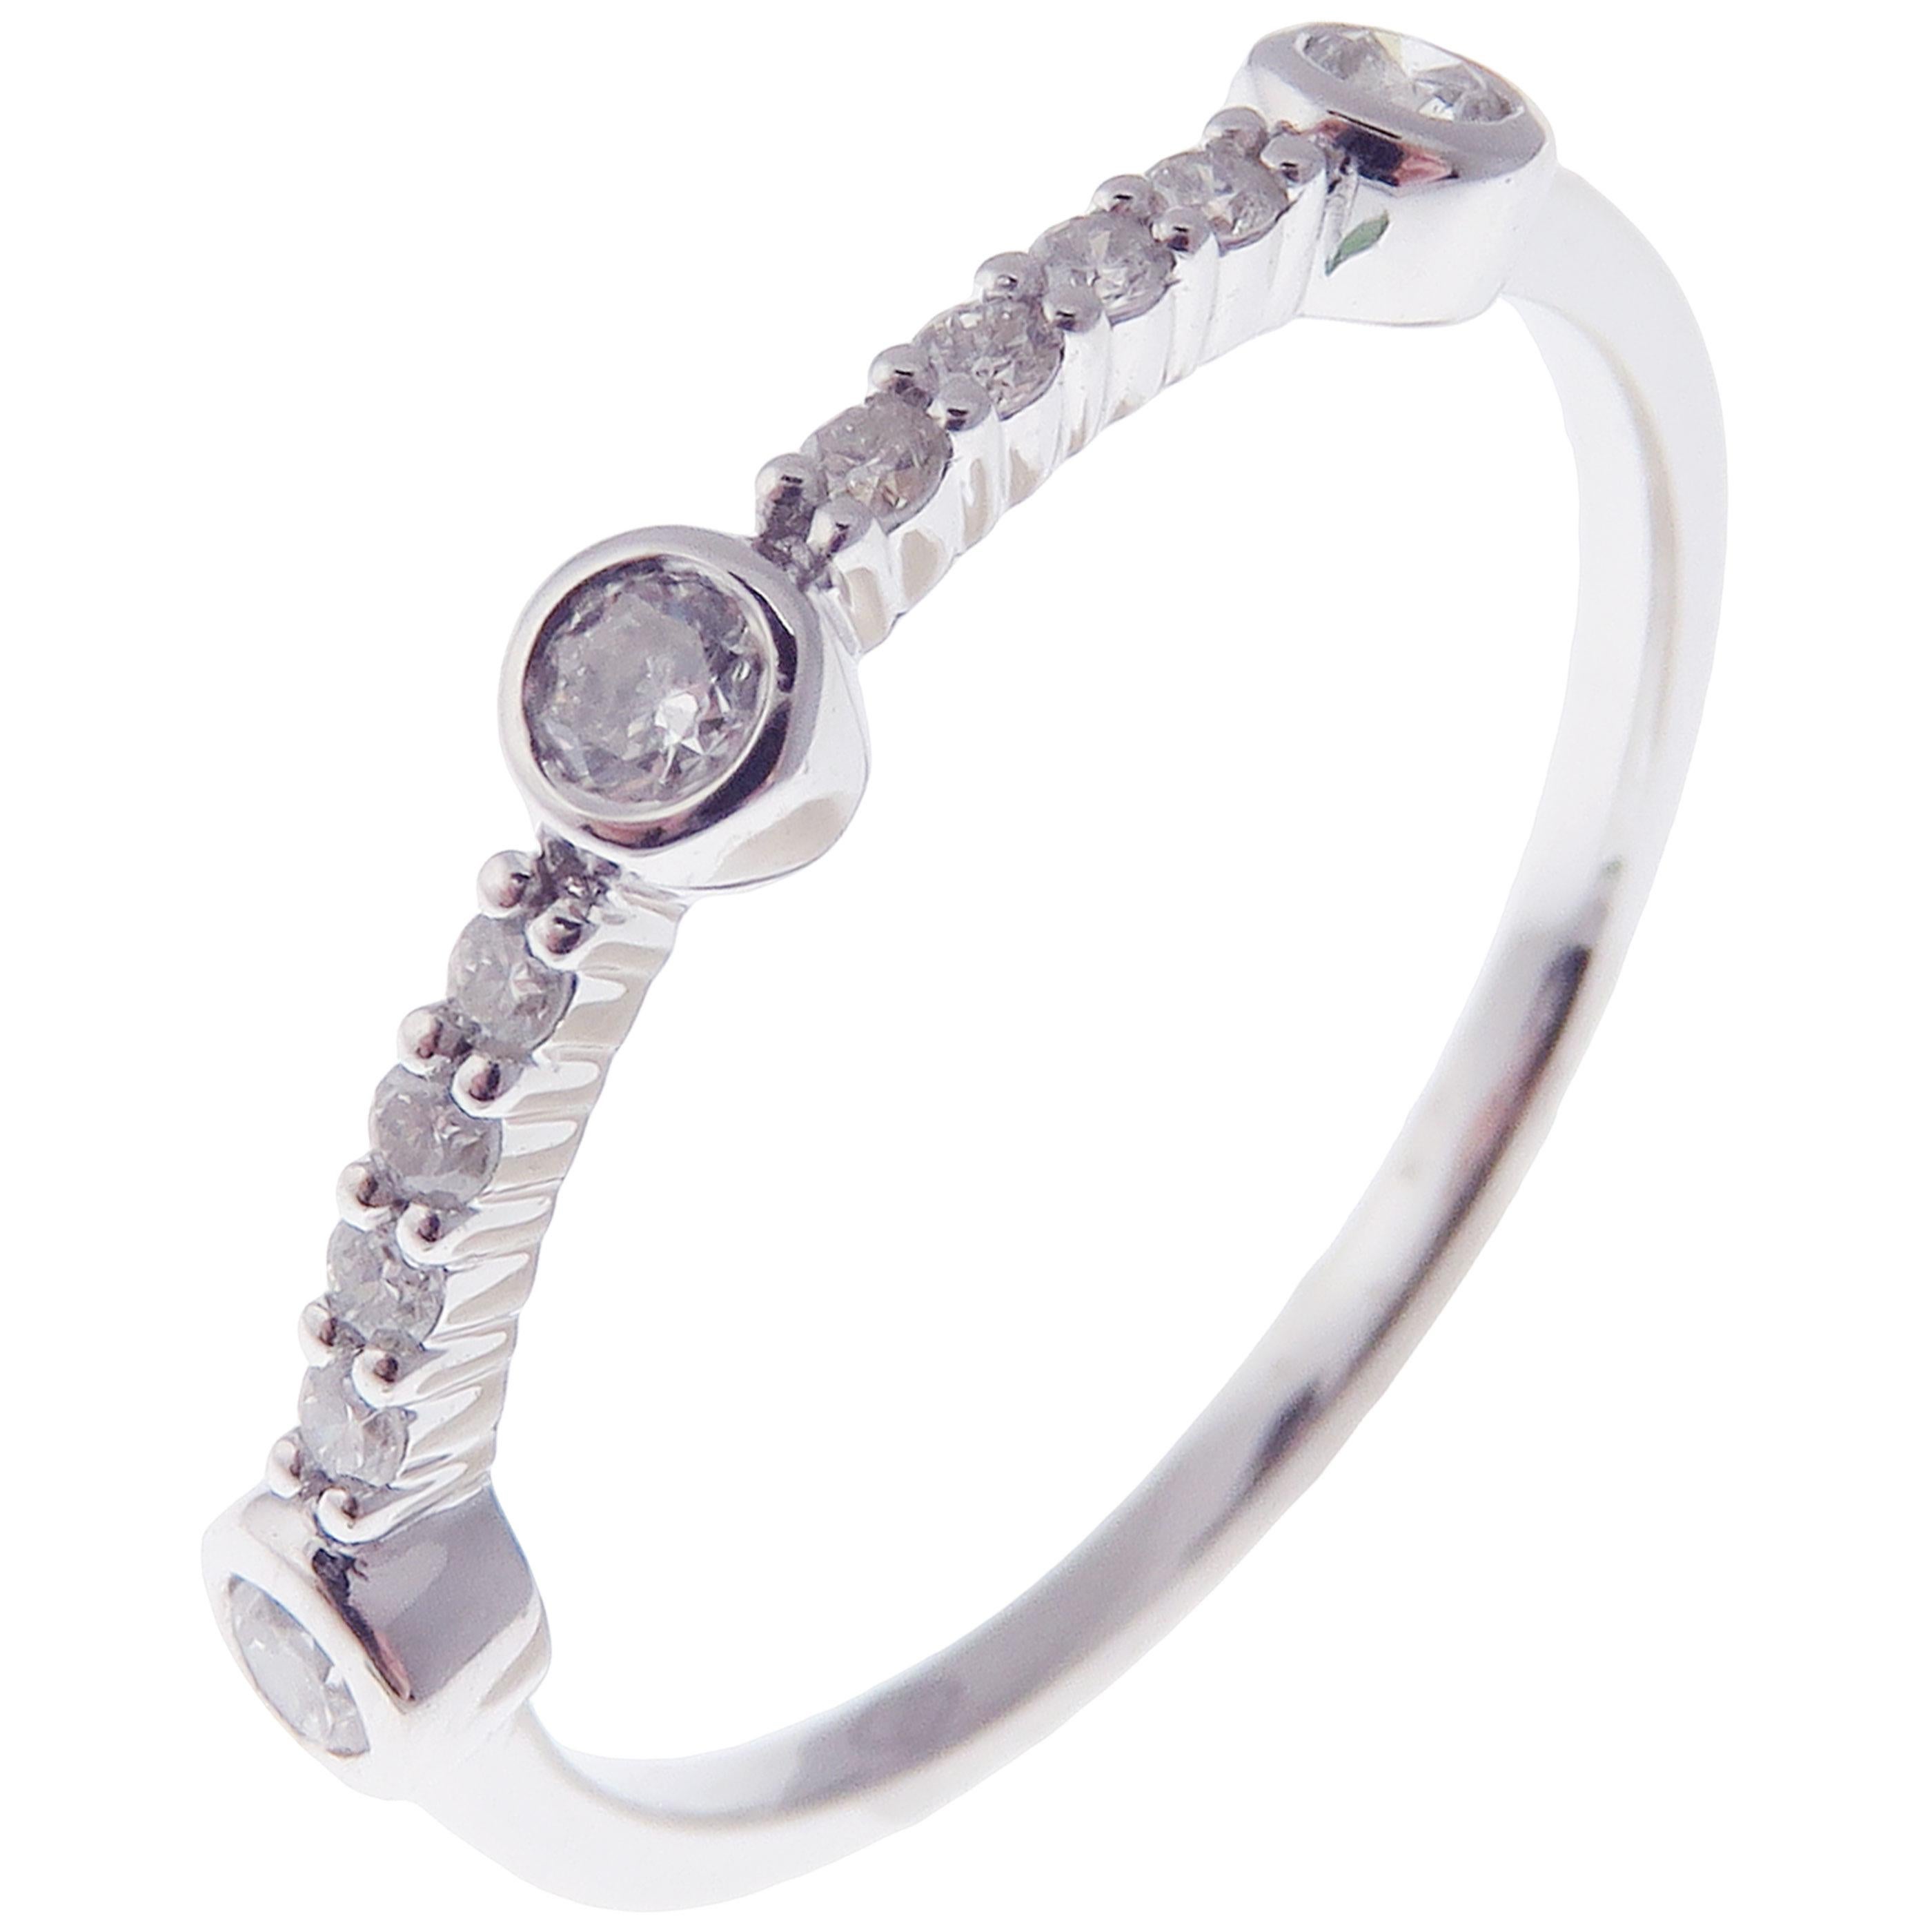 This simple three-stone stackable ring is crafted in 18-karat white gold, featuring 11 round white diamonds totaling of 0.22 carats.
Approximate total weight 1.83 grams.
Standard Ring size 7
SI-G Quality natural white diamonds.